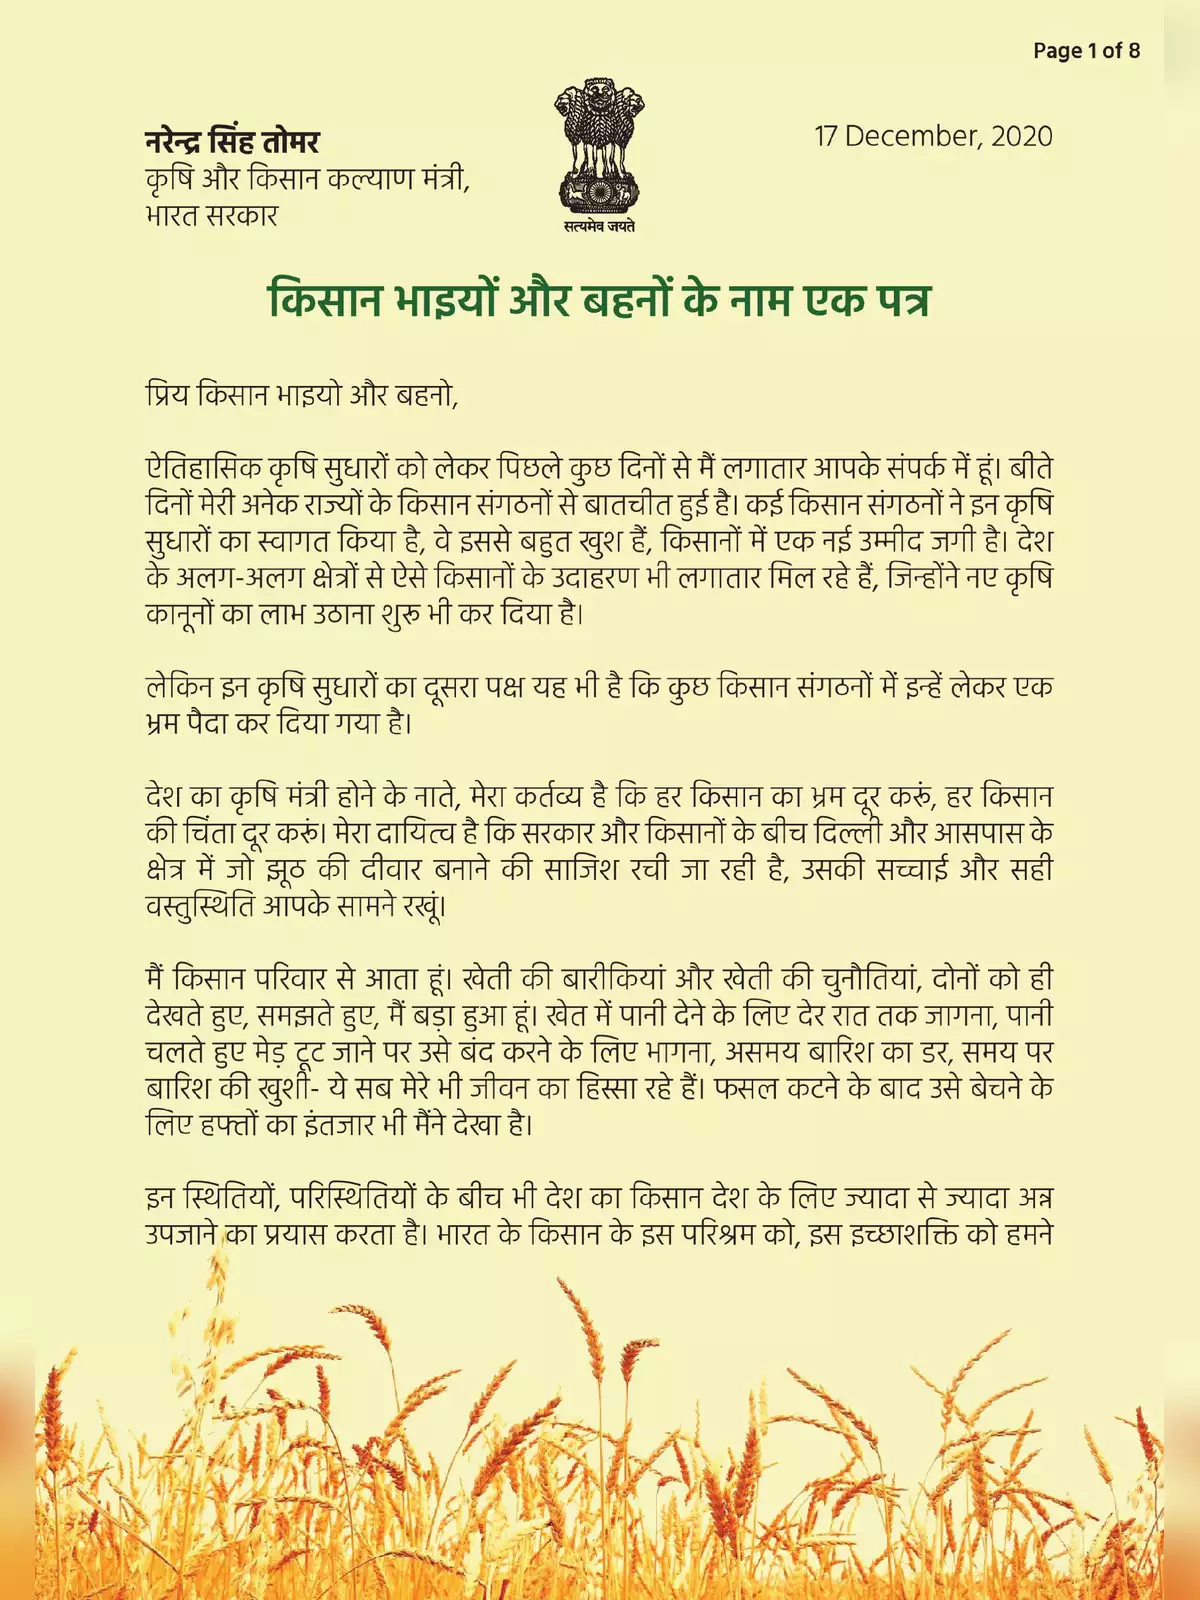 Government’s Letter to Farmers